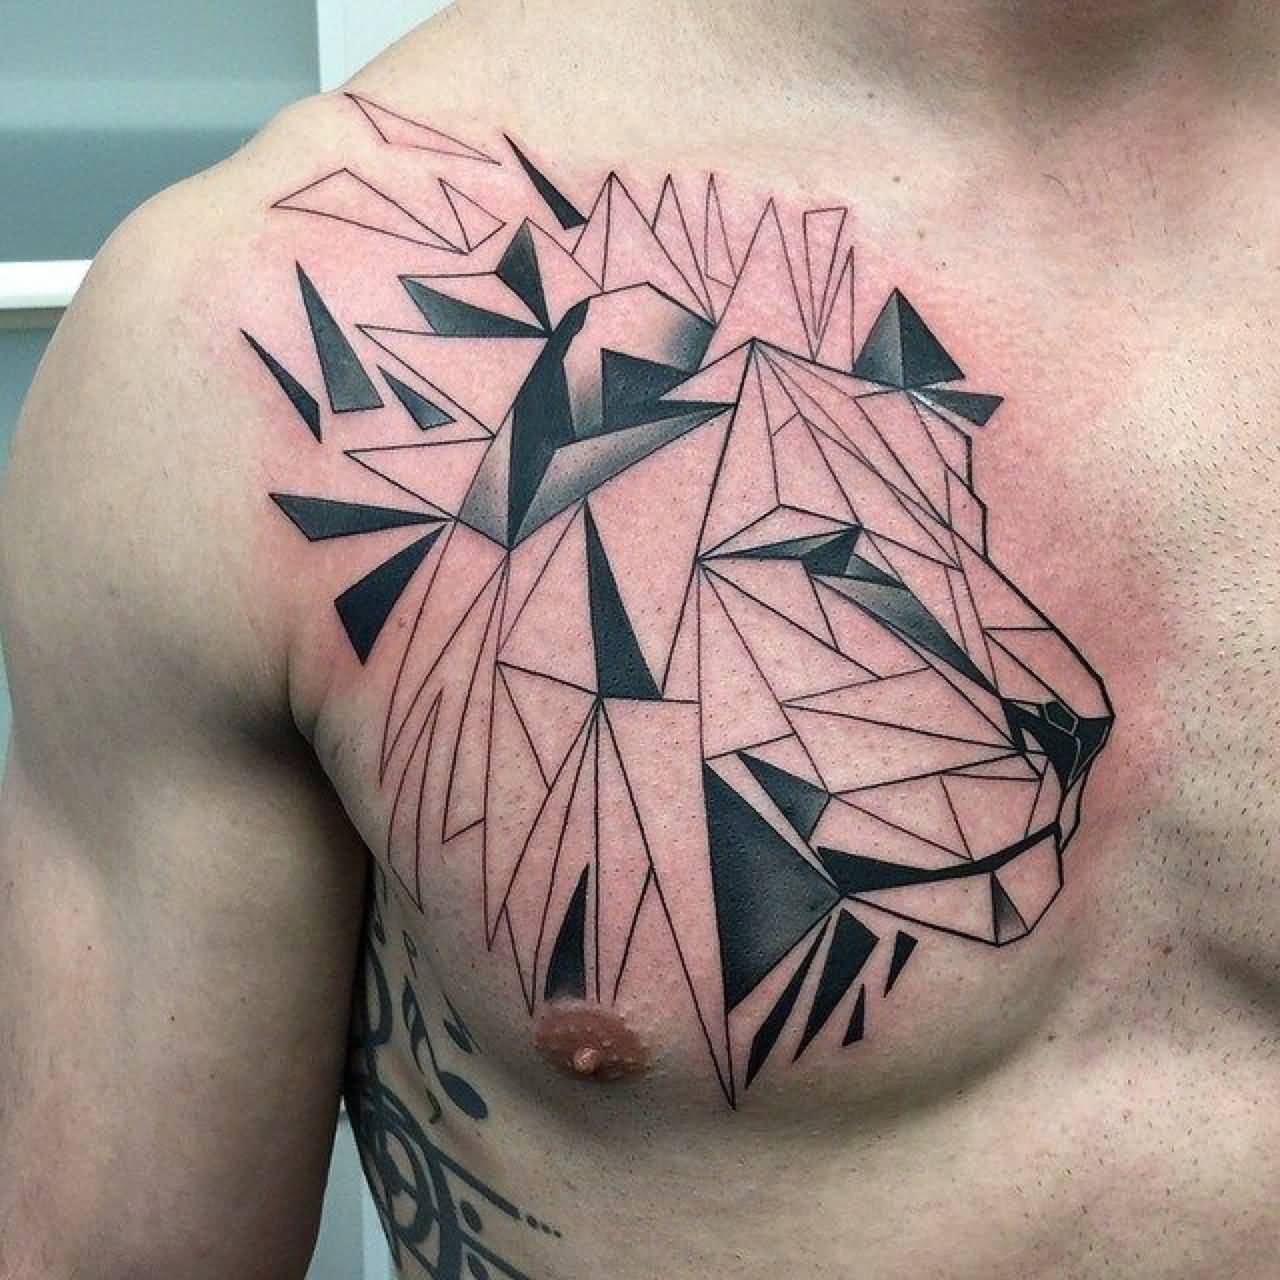 Incredible 3d geometric tattoo On Chest